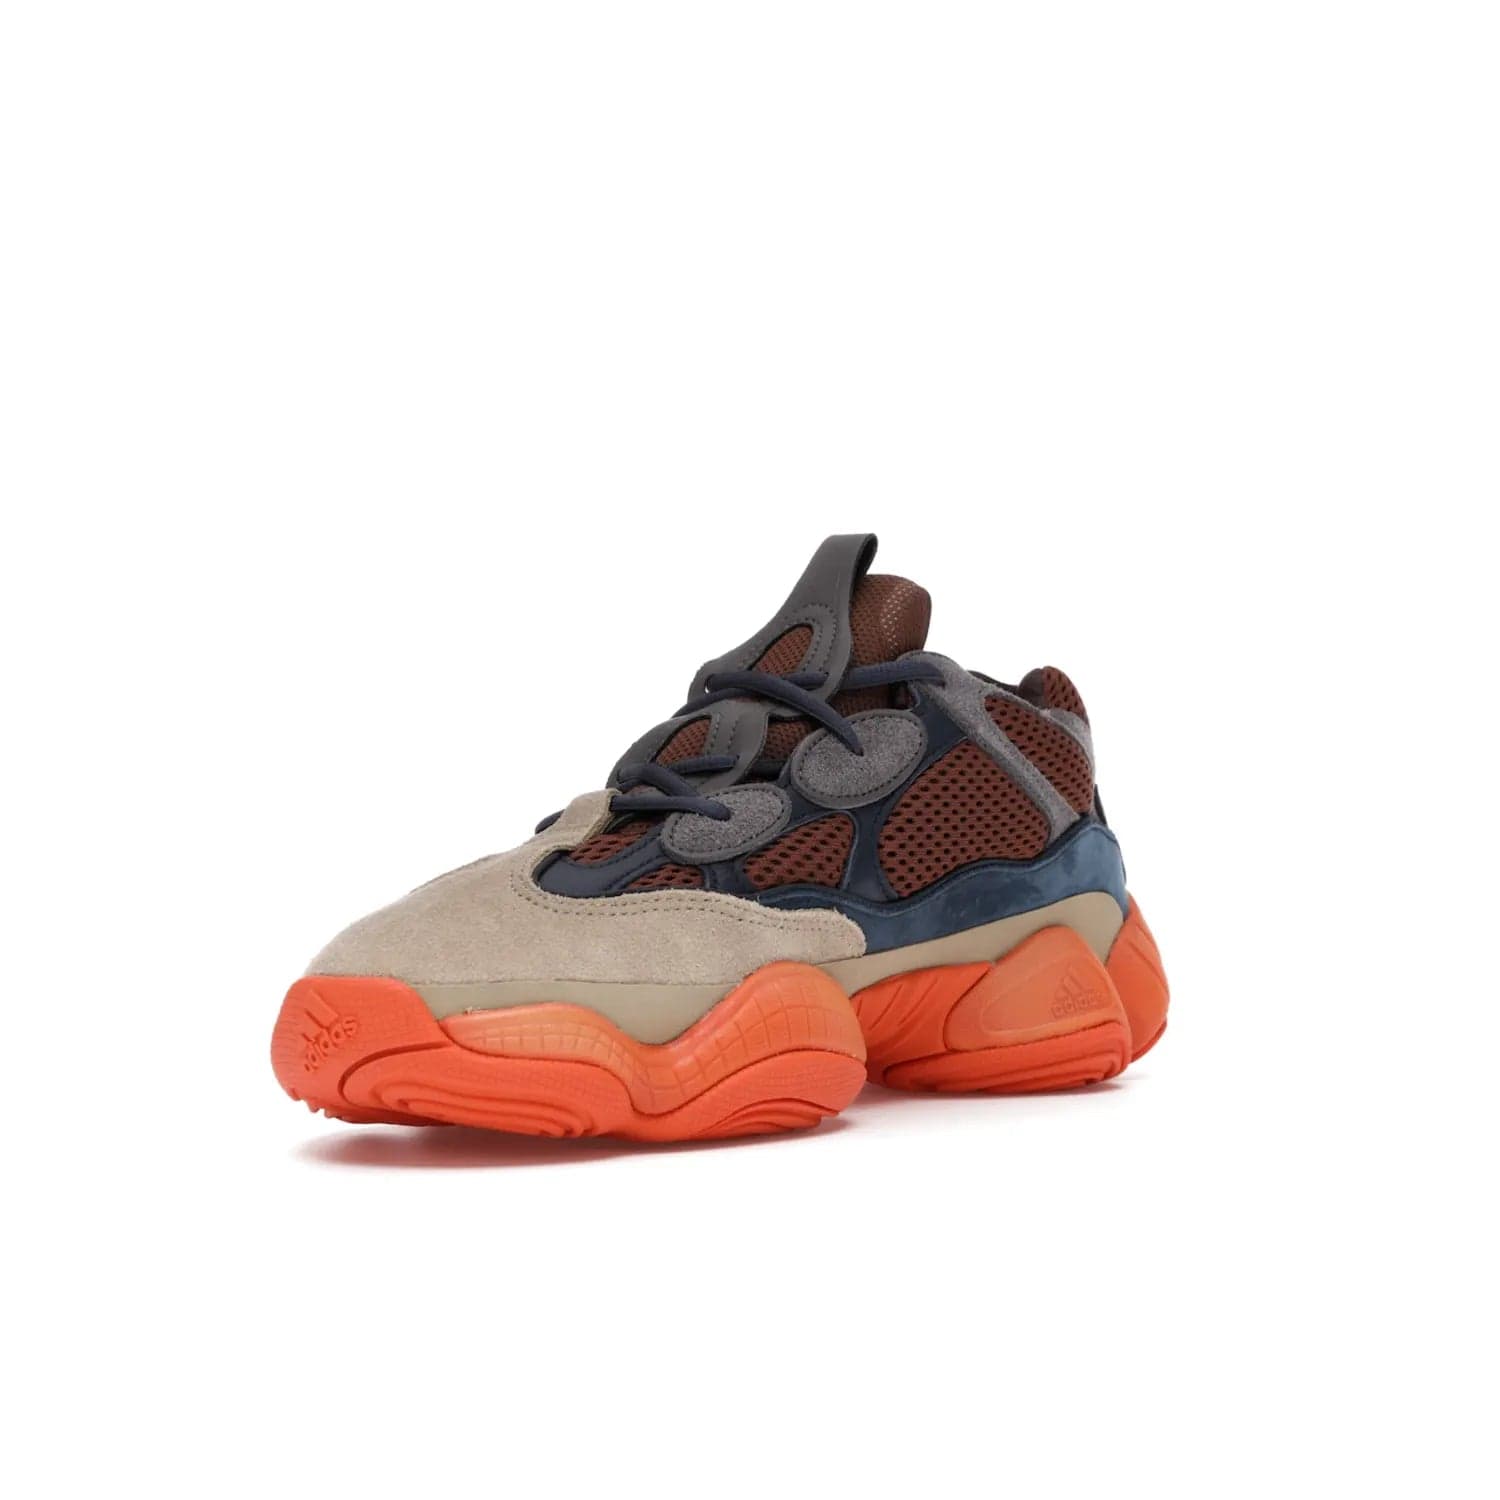 adidas Yeezy 500 Enflame - Image 14 - Only at www.BallersClubKickz.com - Step into style with the adidas Yeezy 500 Enflame. Mix of mesh, leather, and suede layered together to create tonal-brown, dark blue, & orange. Orange AdiPRENE sole provides superior cushioning & comfort. Get yours and experience maximum style.